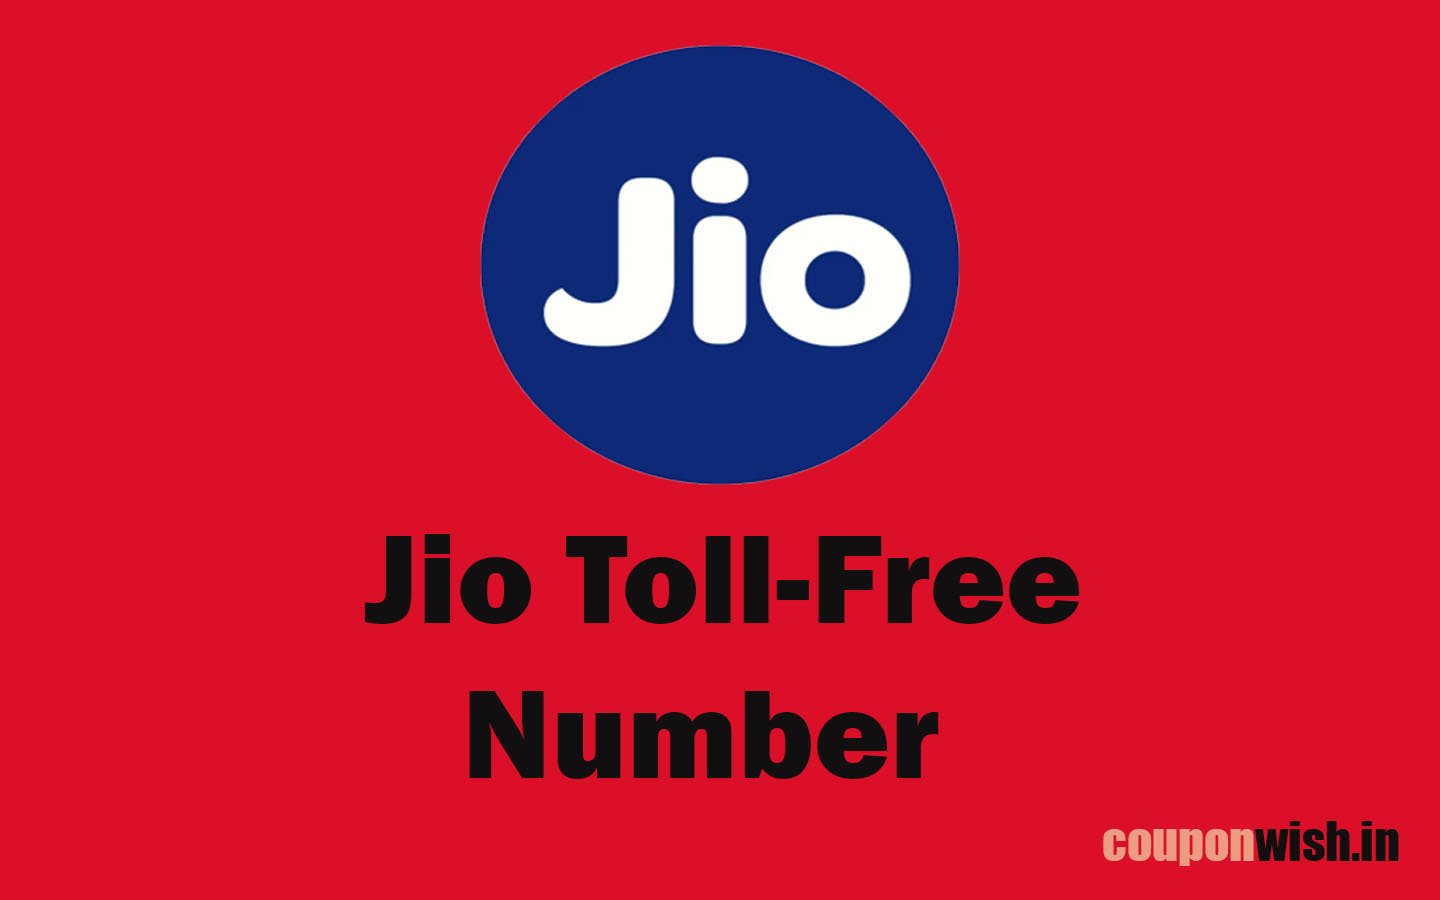 Jio Toll-Free Number: Customer Care Toll-Free Helpline Contact Number